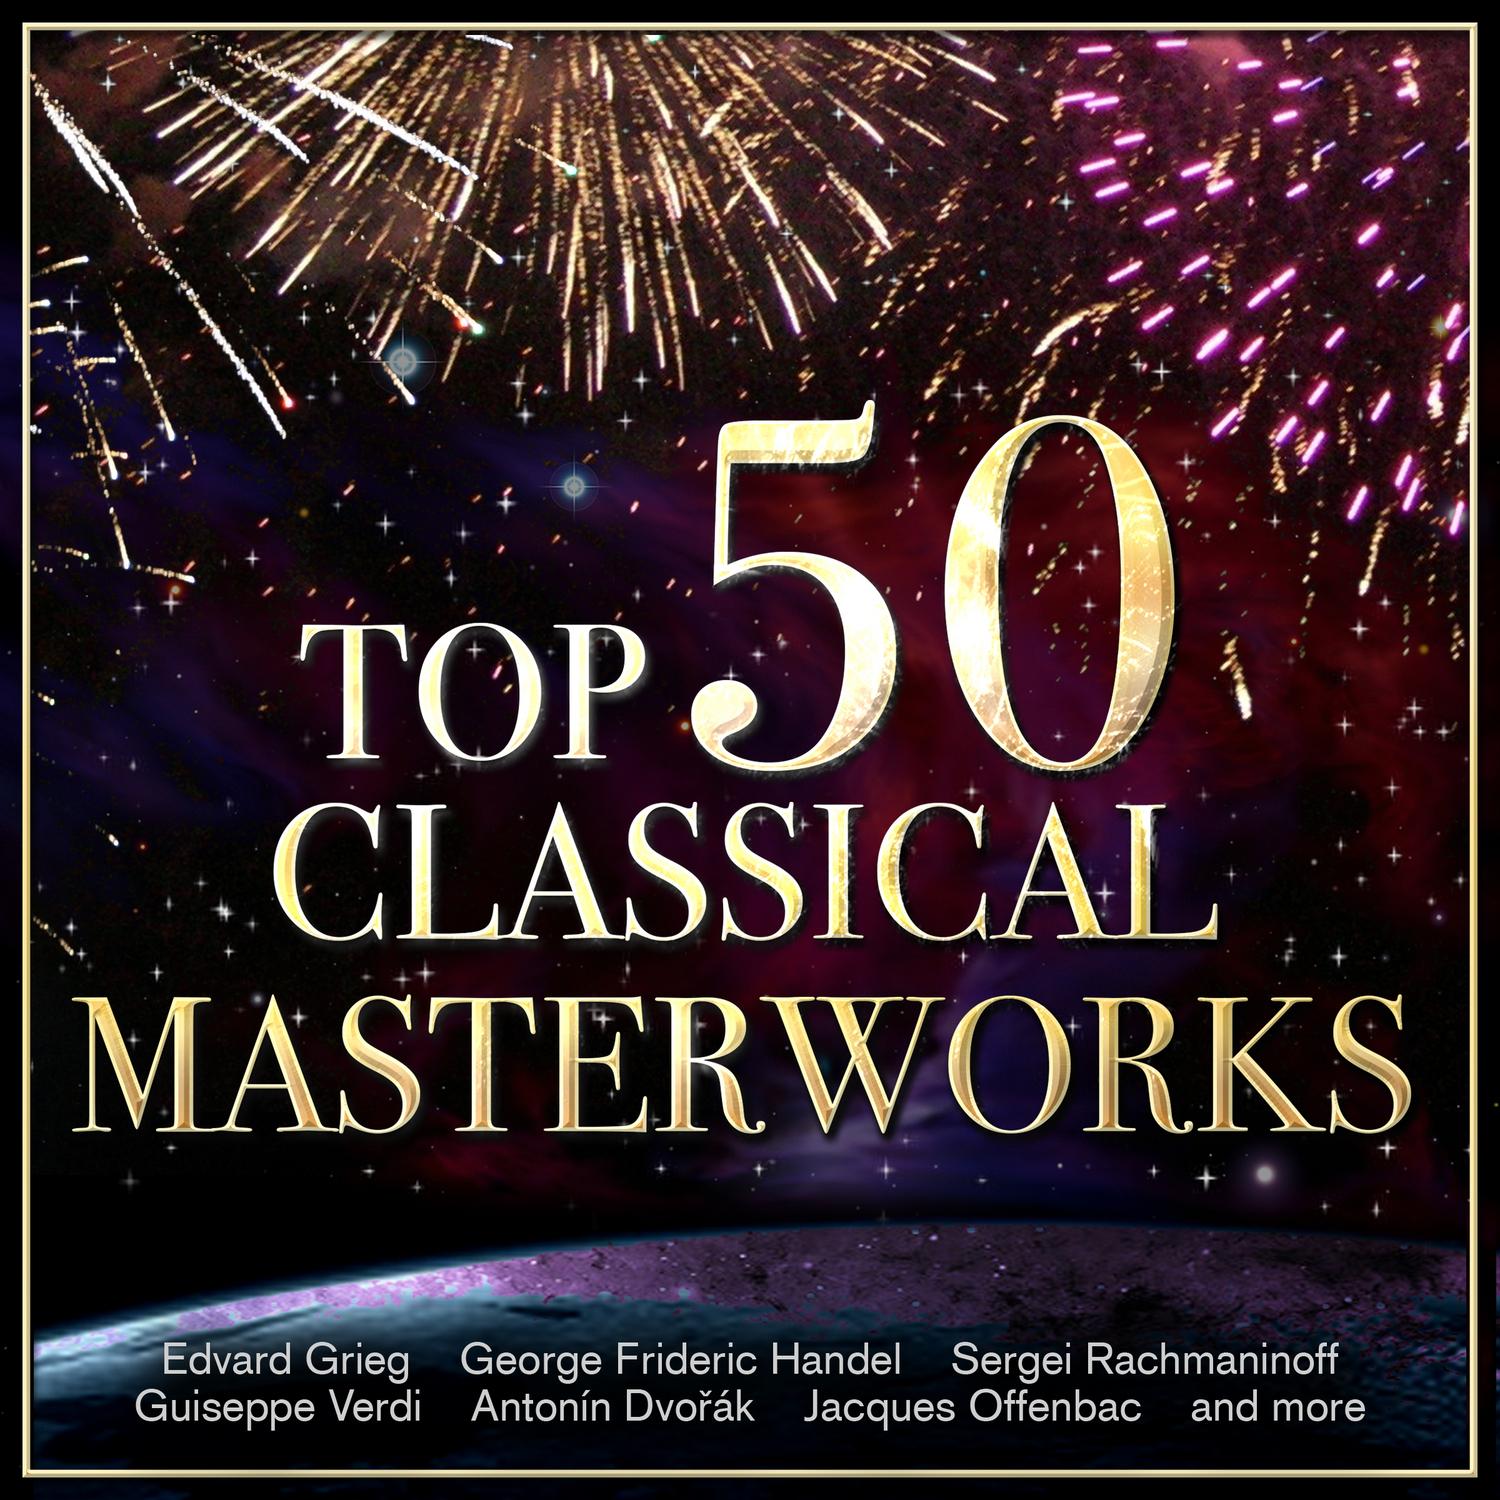 Top 50 Classical Masterworks